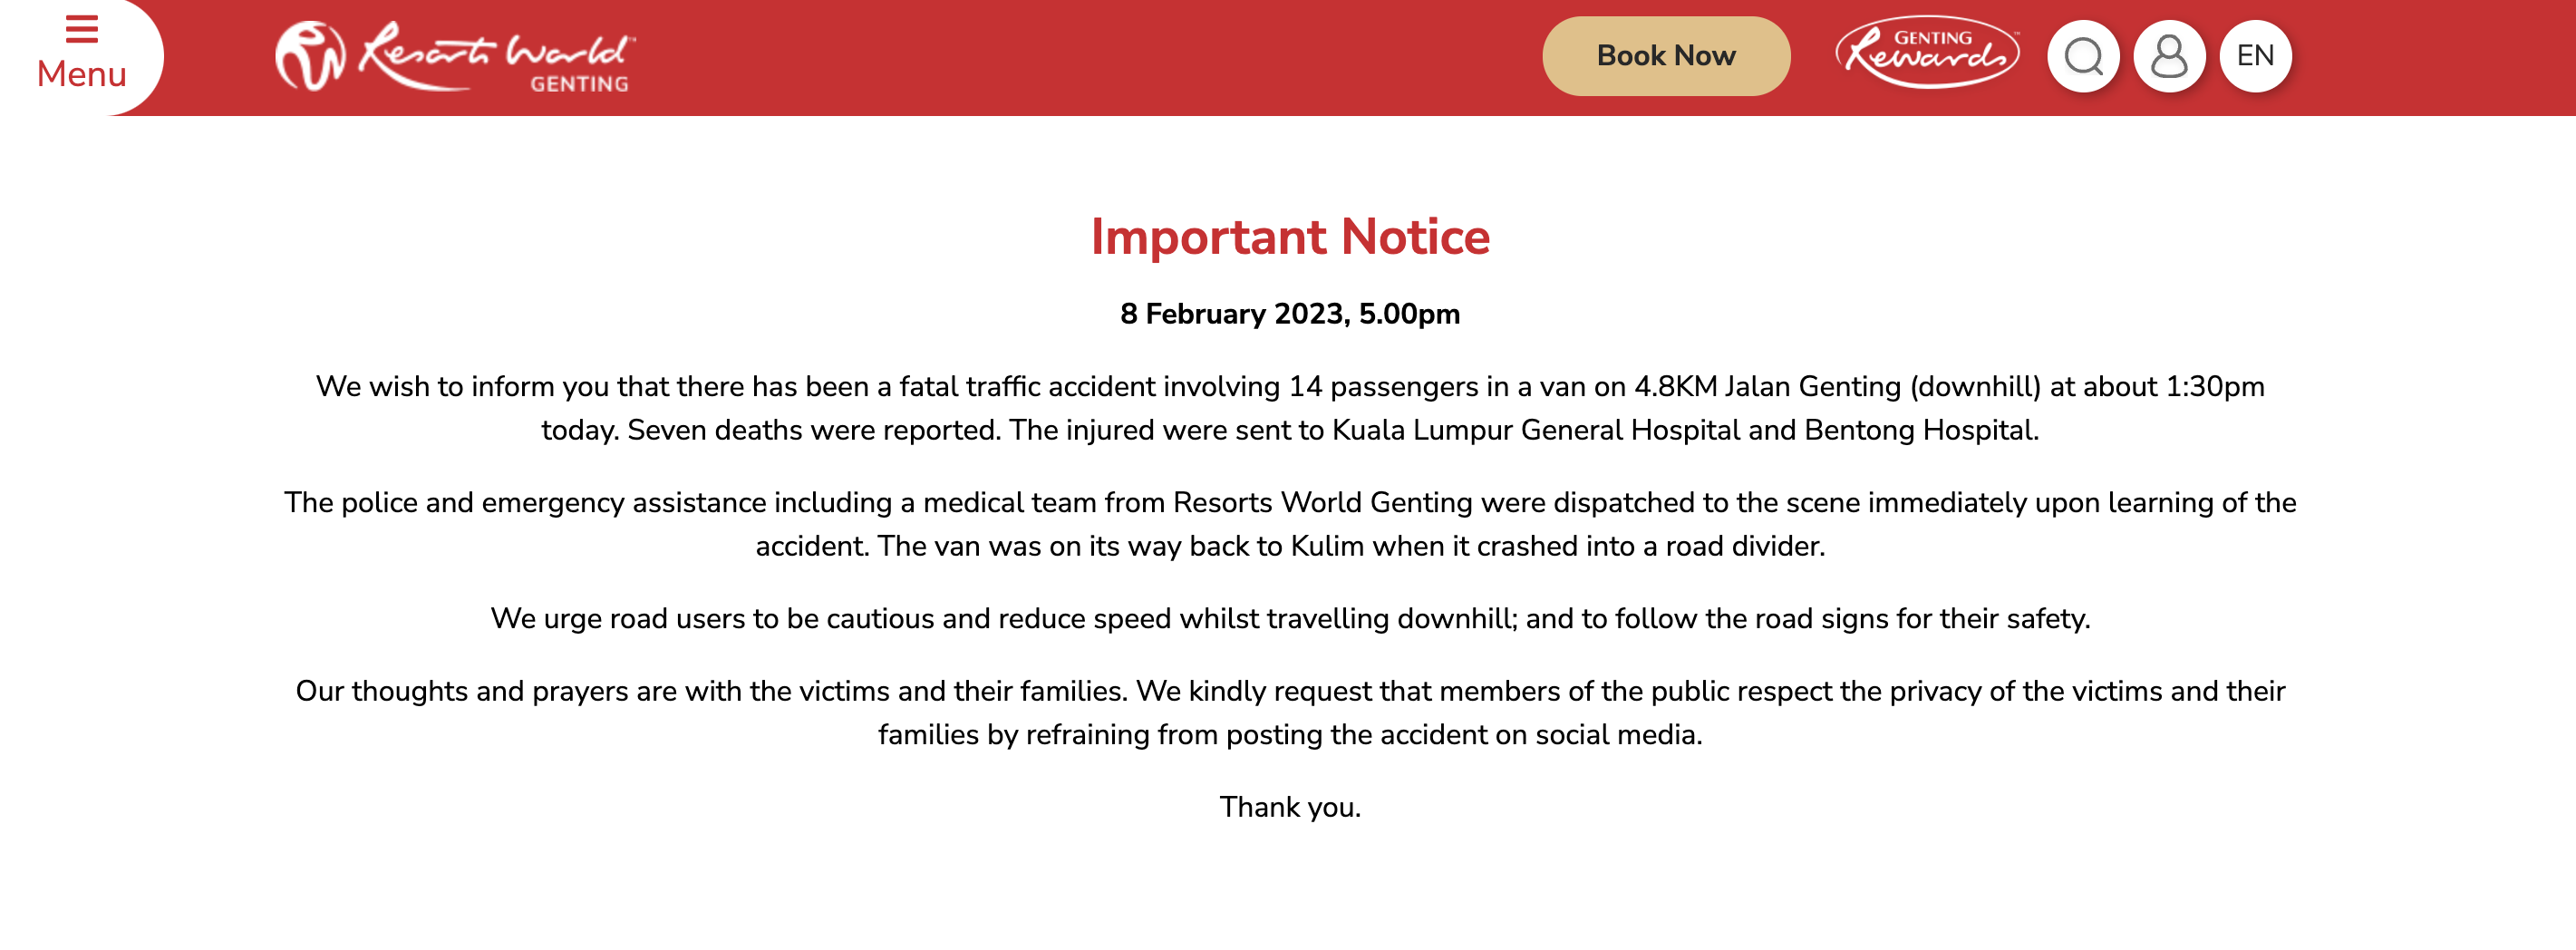 Genting highlands urges m’sians not to share images about the van tragedy online in latest statement  | weirdkaya